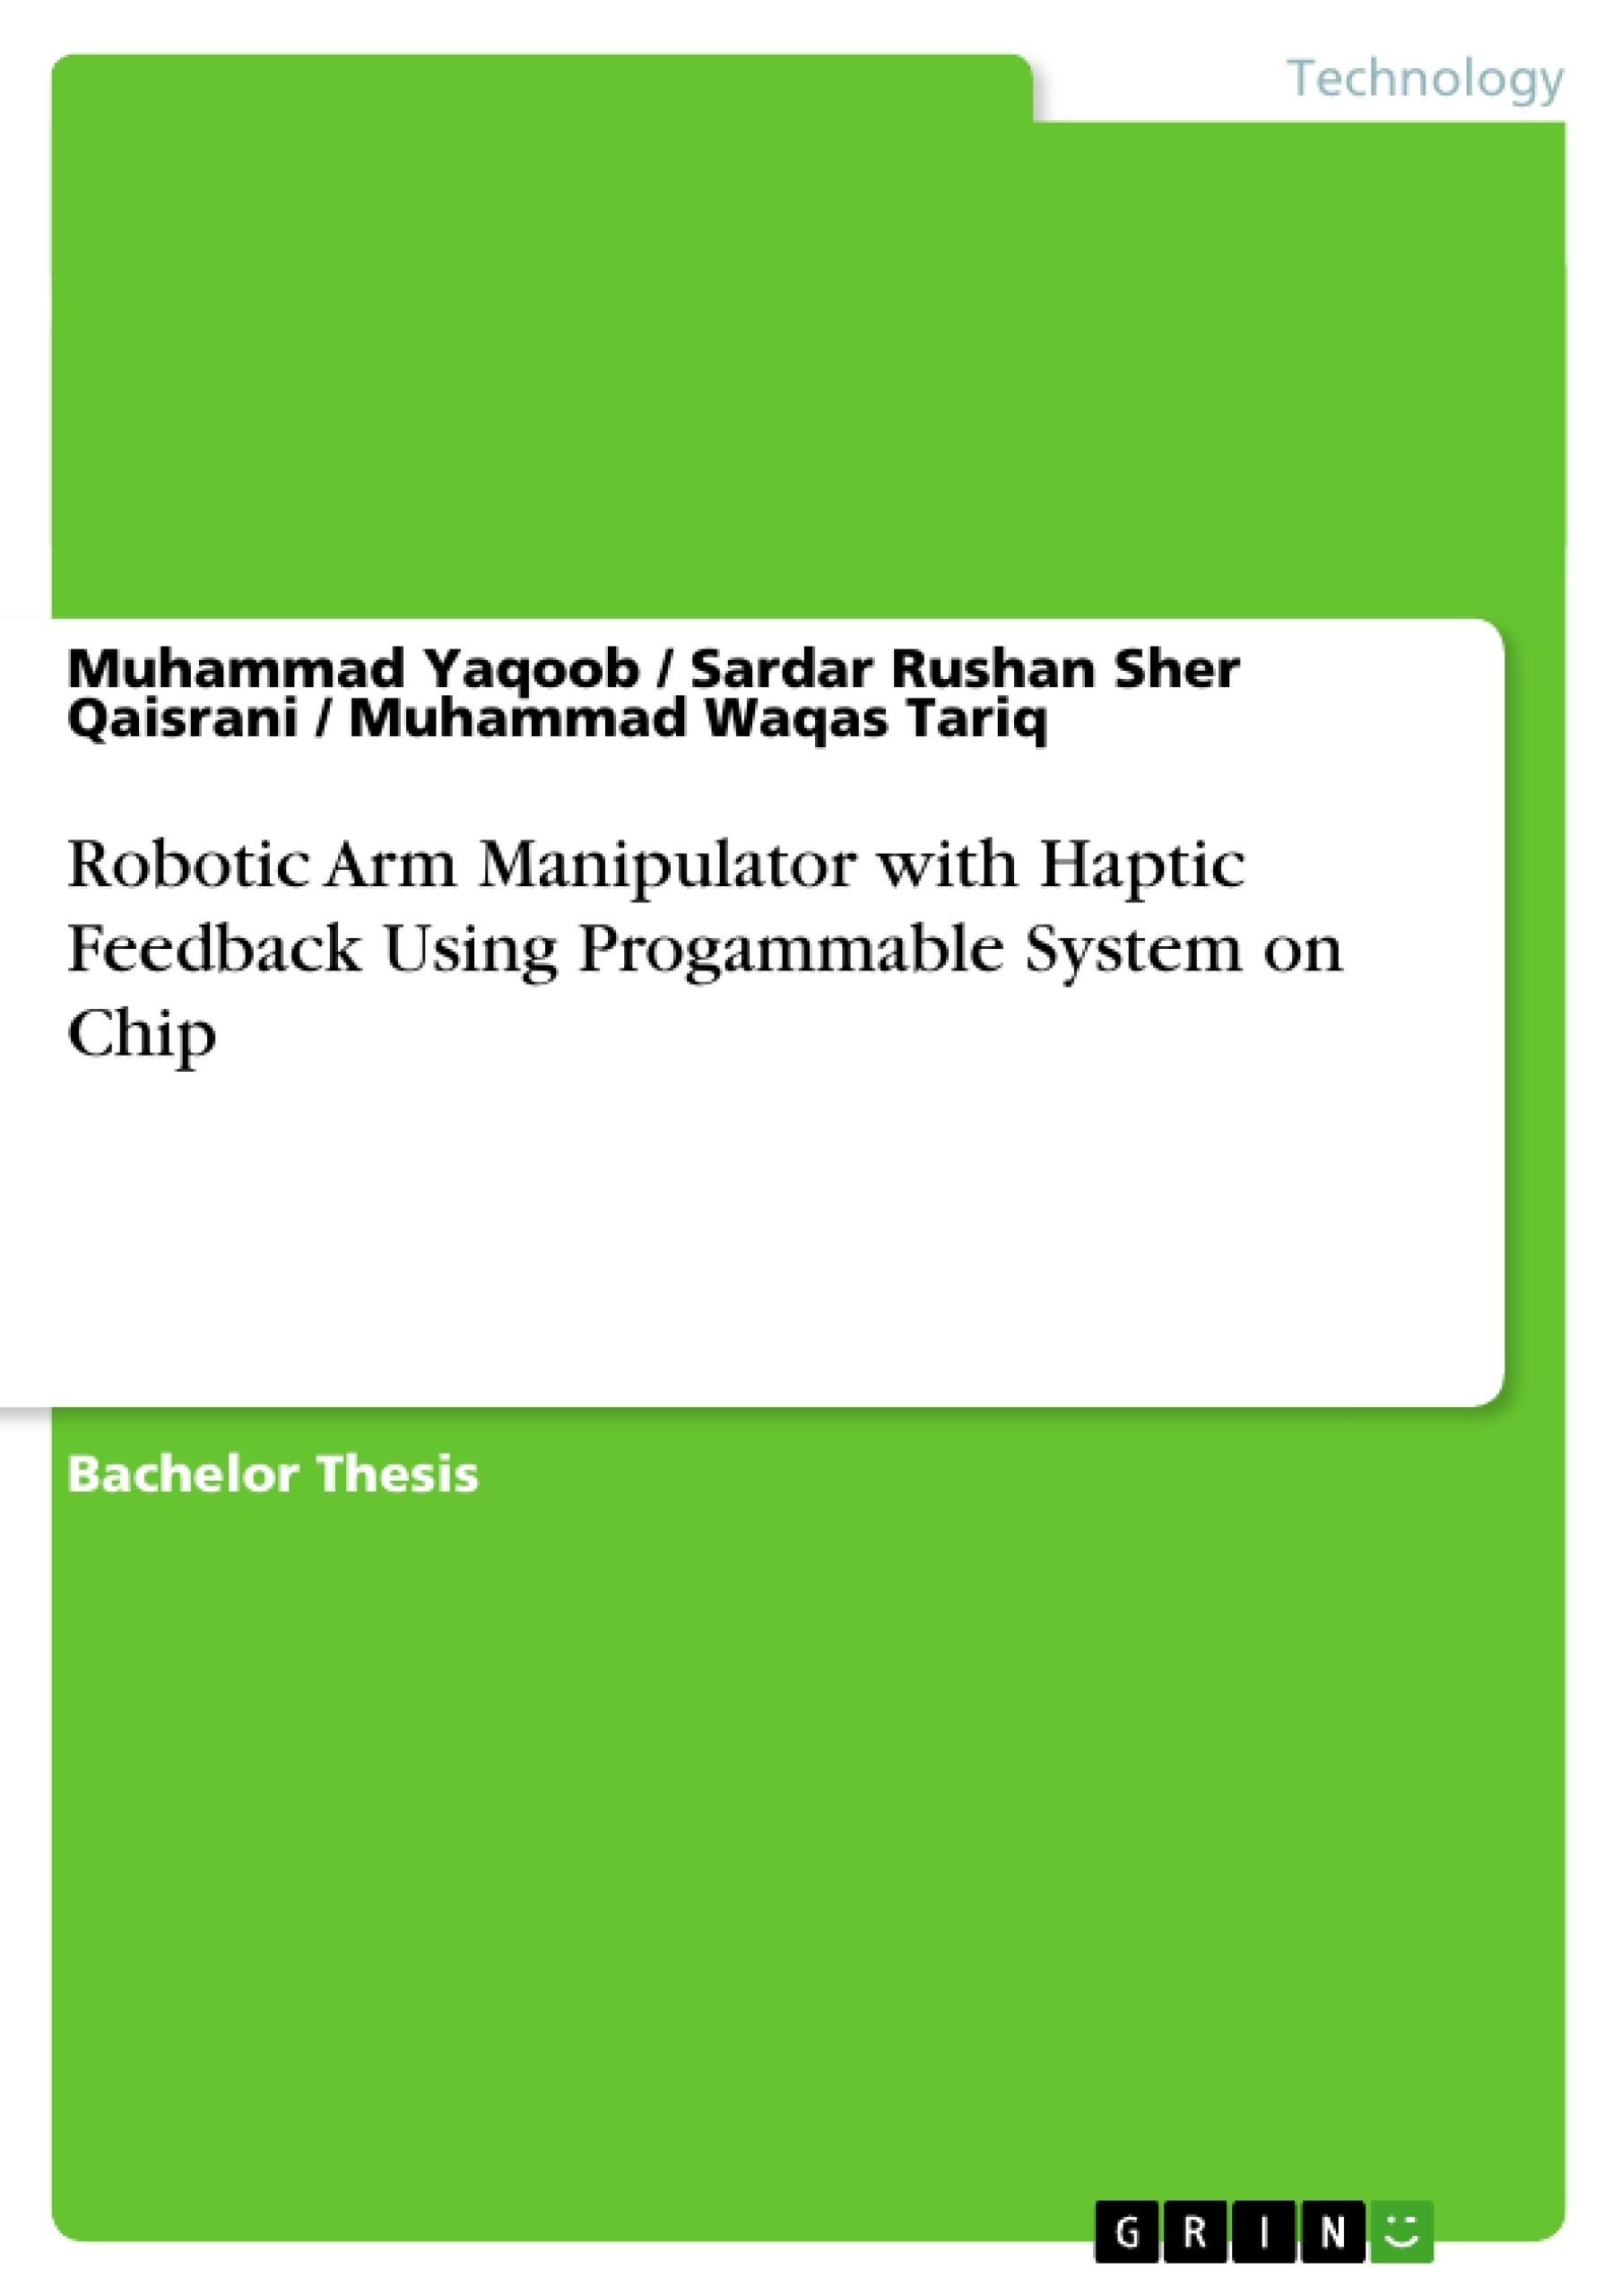 Title: Robotic Arm Manipulator with Haptic Feedback Using Progammable System on Chip